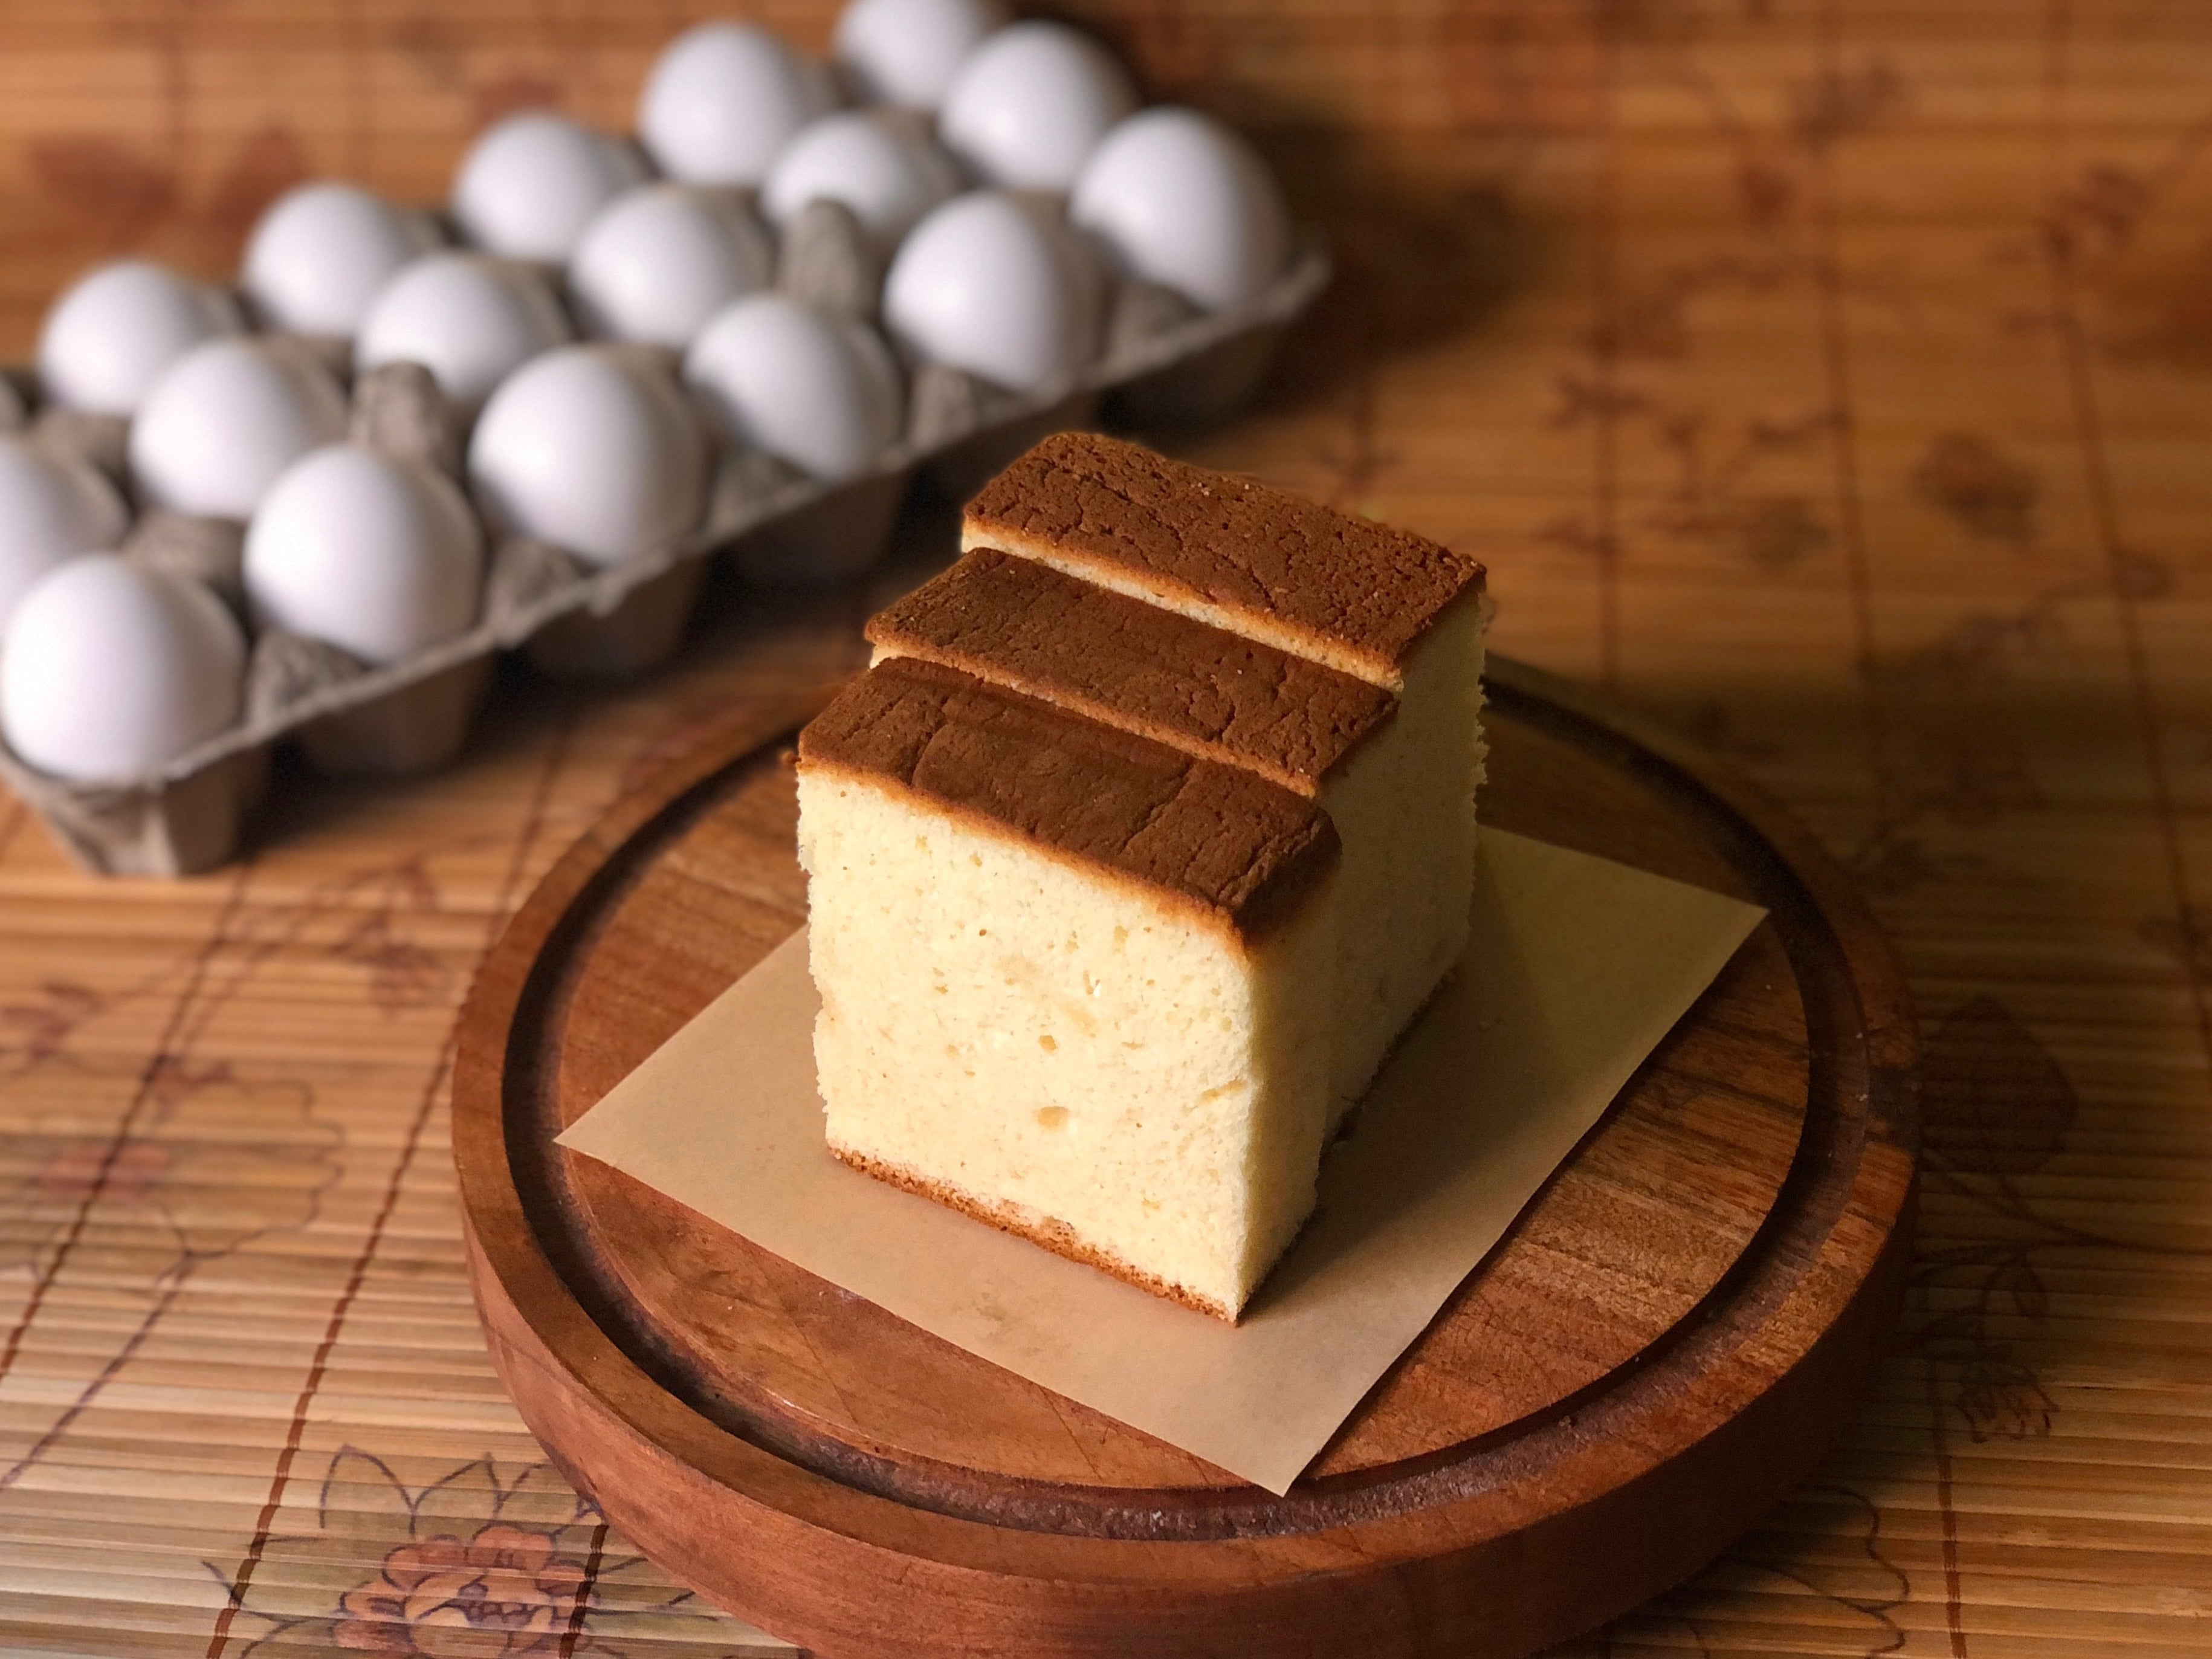 Japanese Desserts and Cakes – Gourmand Trotter